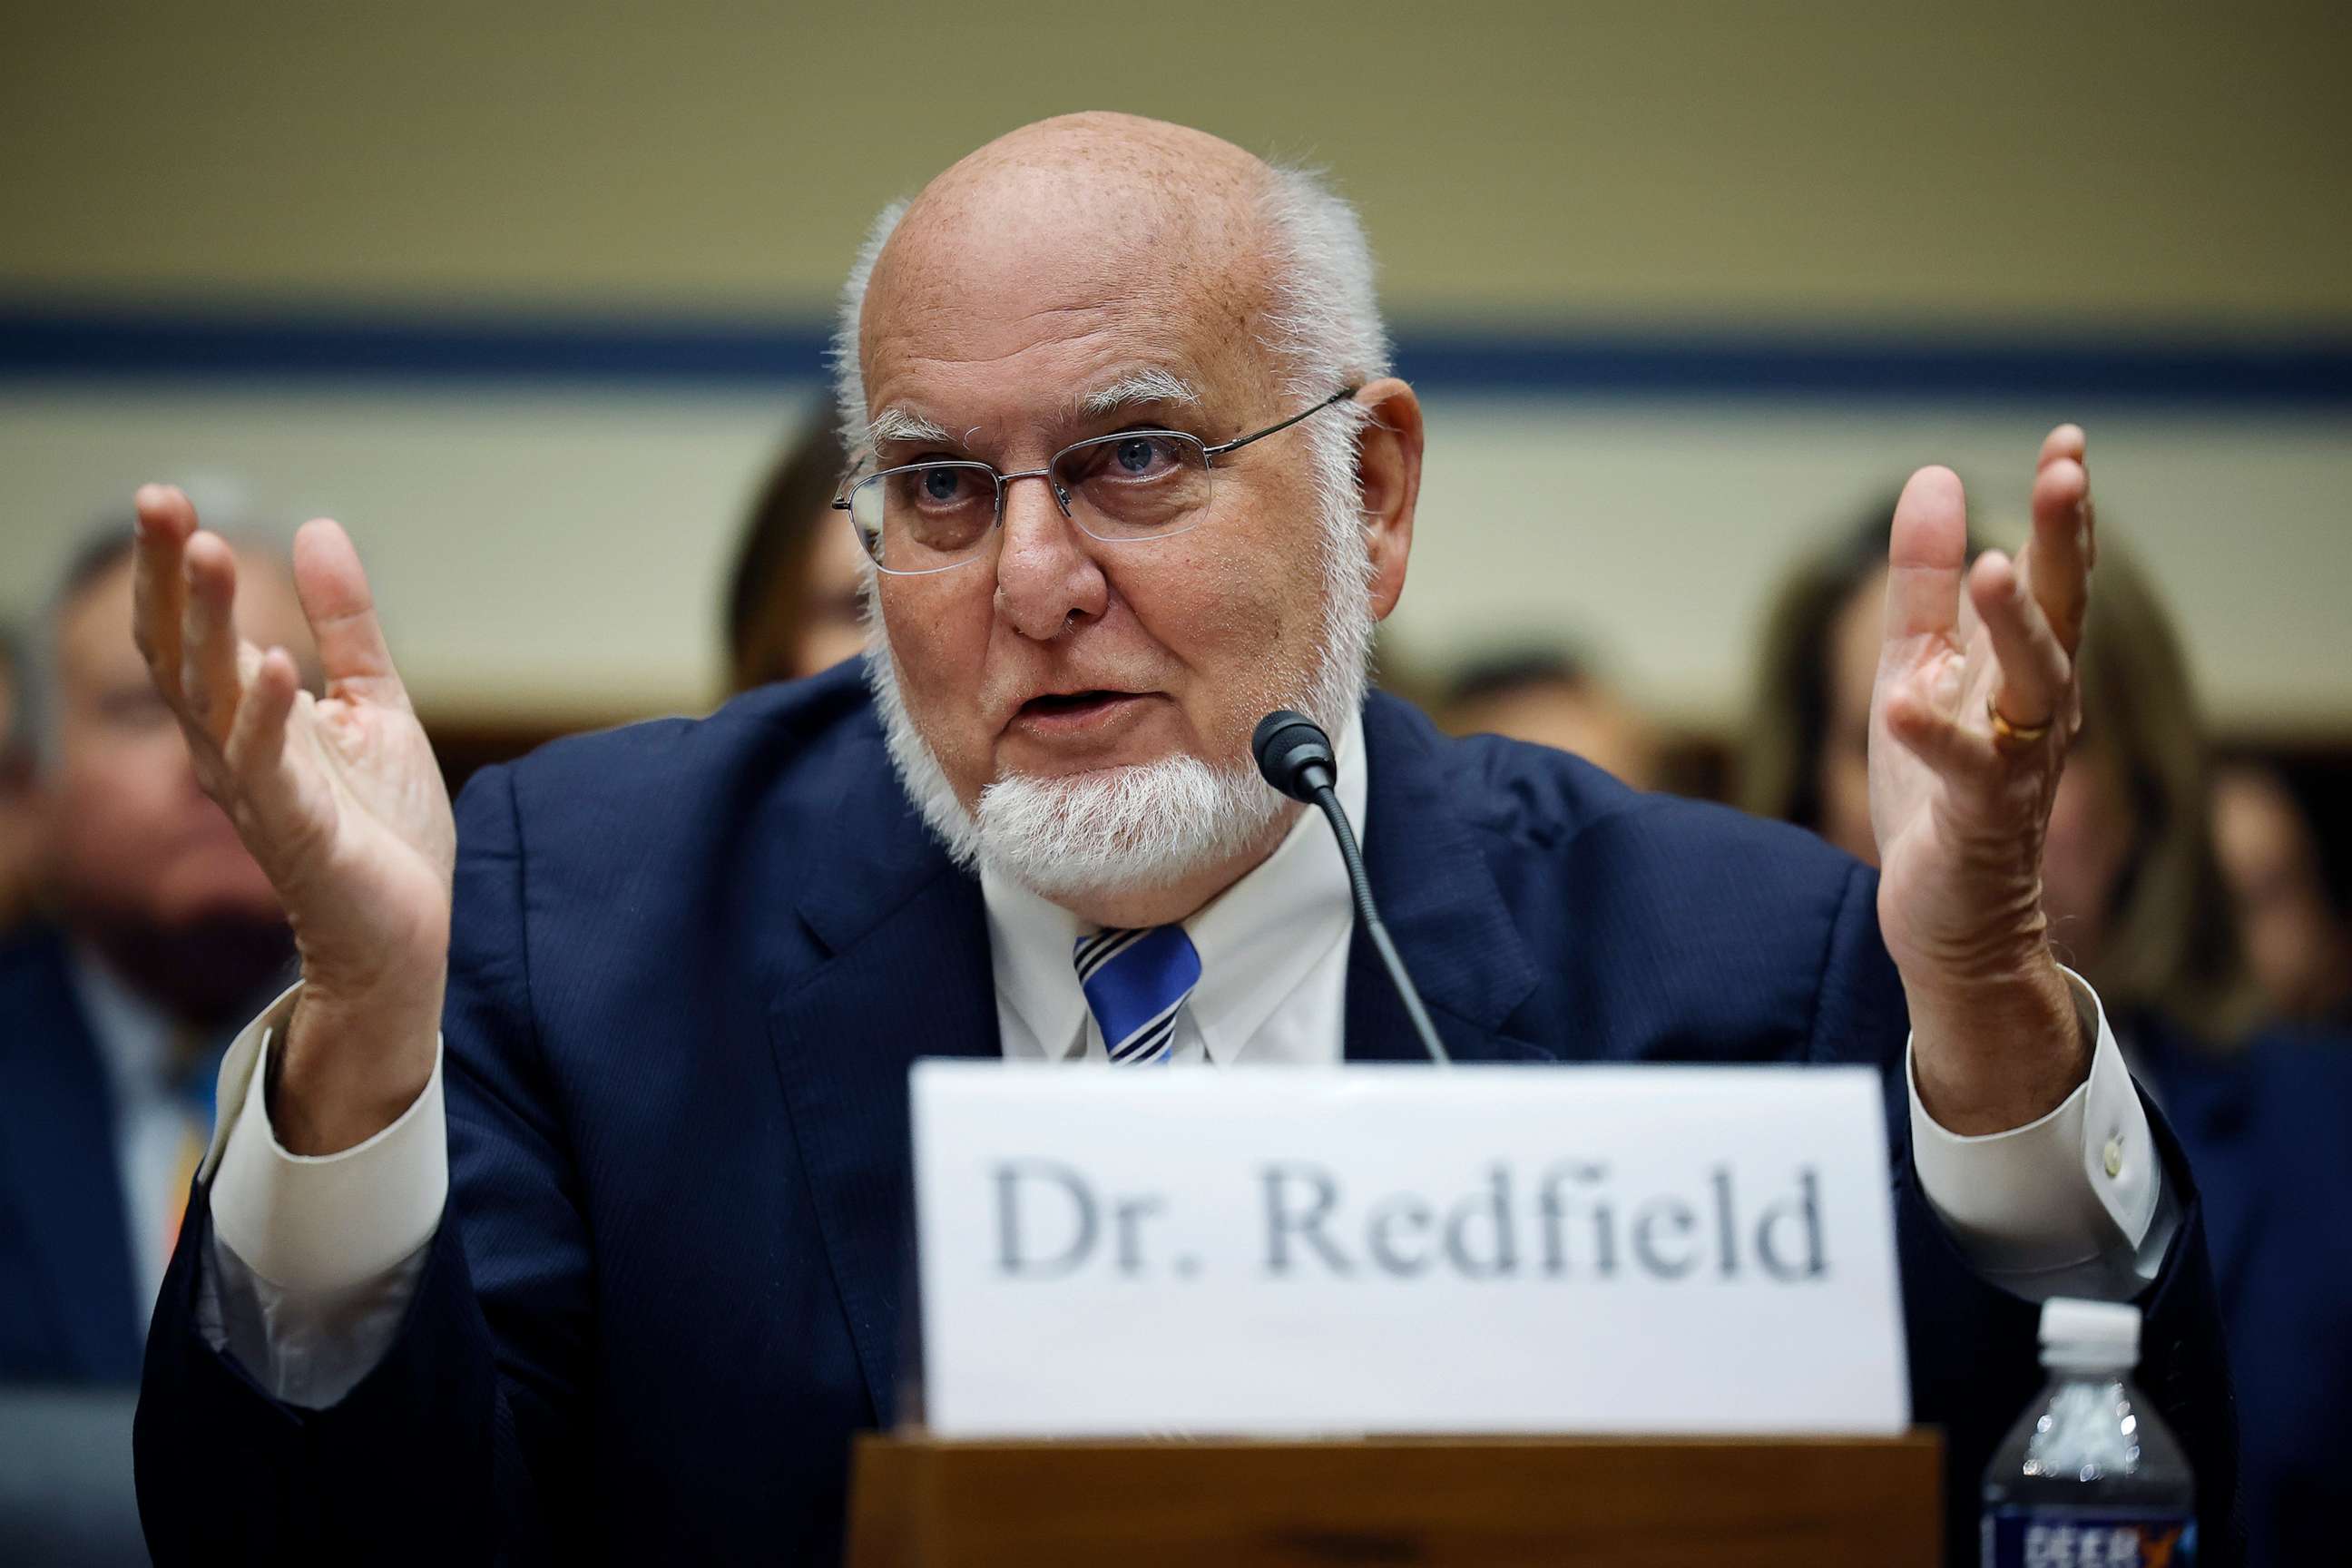 PHOTO: Dr. Robert Redfield, former director of the U.S. Centers for Disease Control and Prevention under former President Donald Trump, testifies on Capitol Hill, on March 8, 2023, in Washington, D.C.